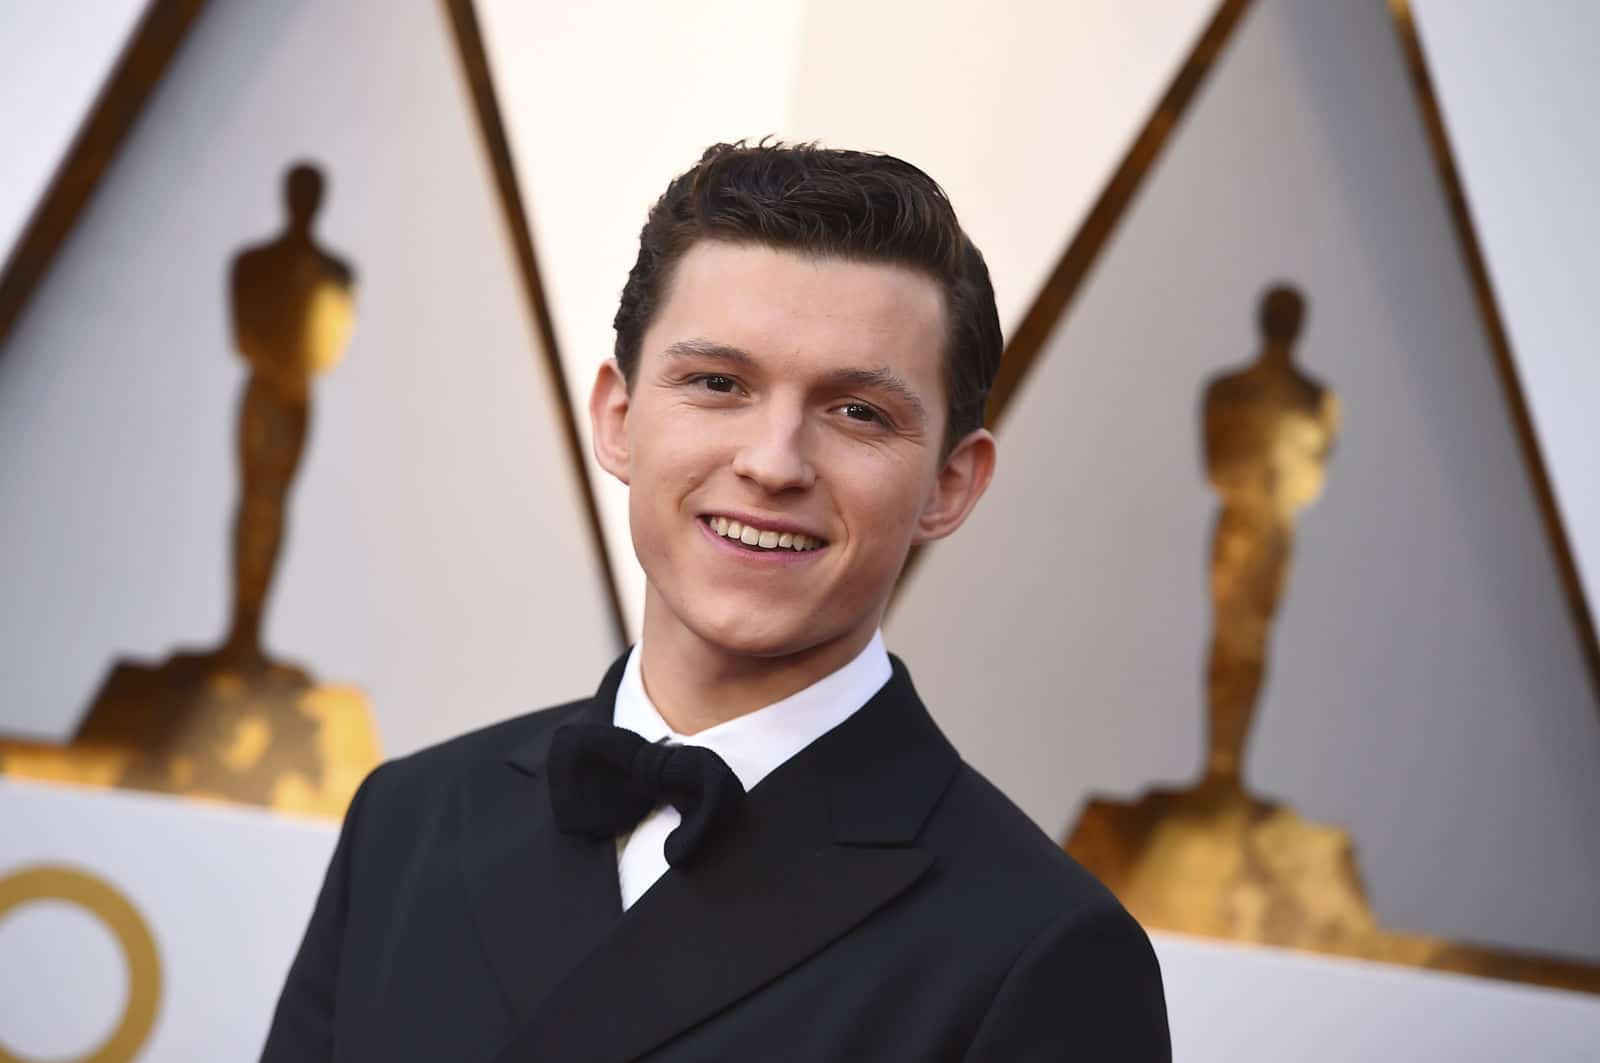 Tom Holland arrives at the Oscars on Sunday, March 4, 2018, at the Dolby Theatre in Los Angeles. (Photo by Jordan Strauss/Invision/AP)